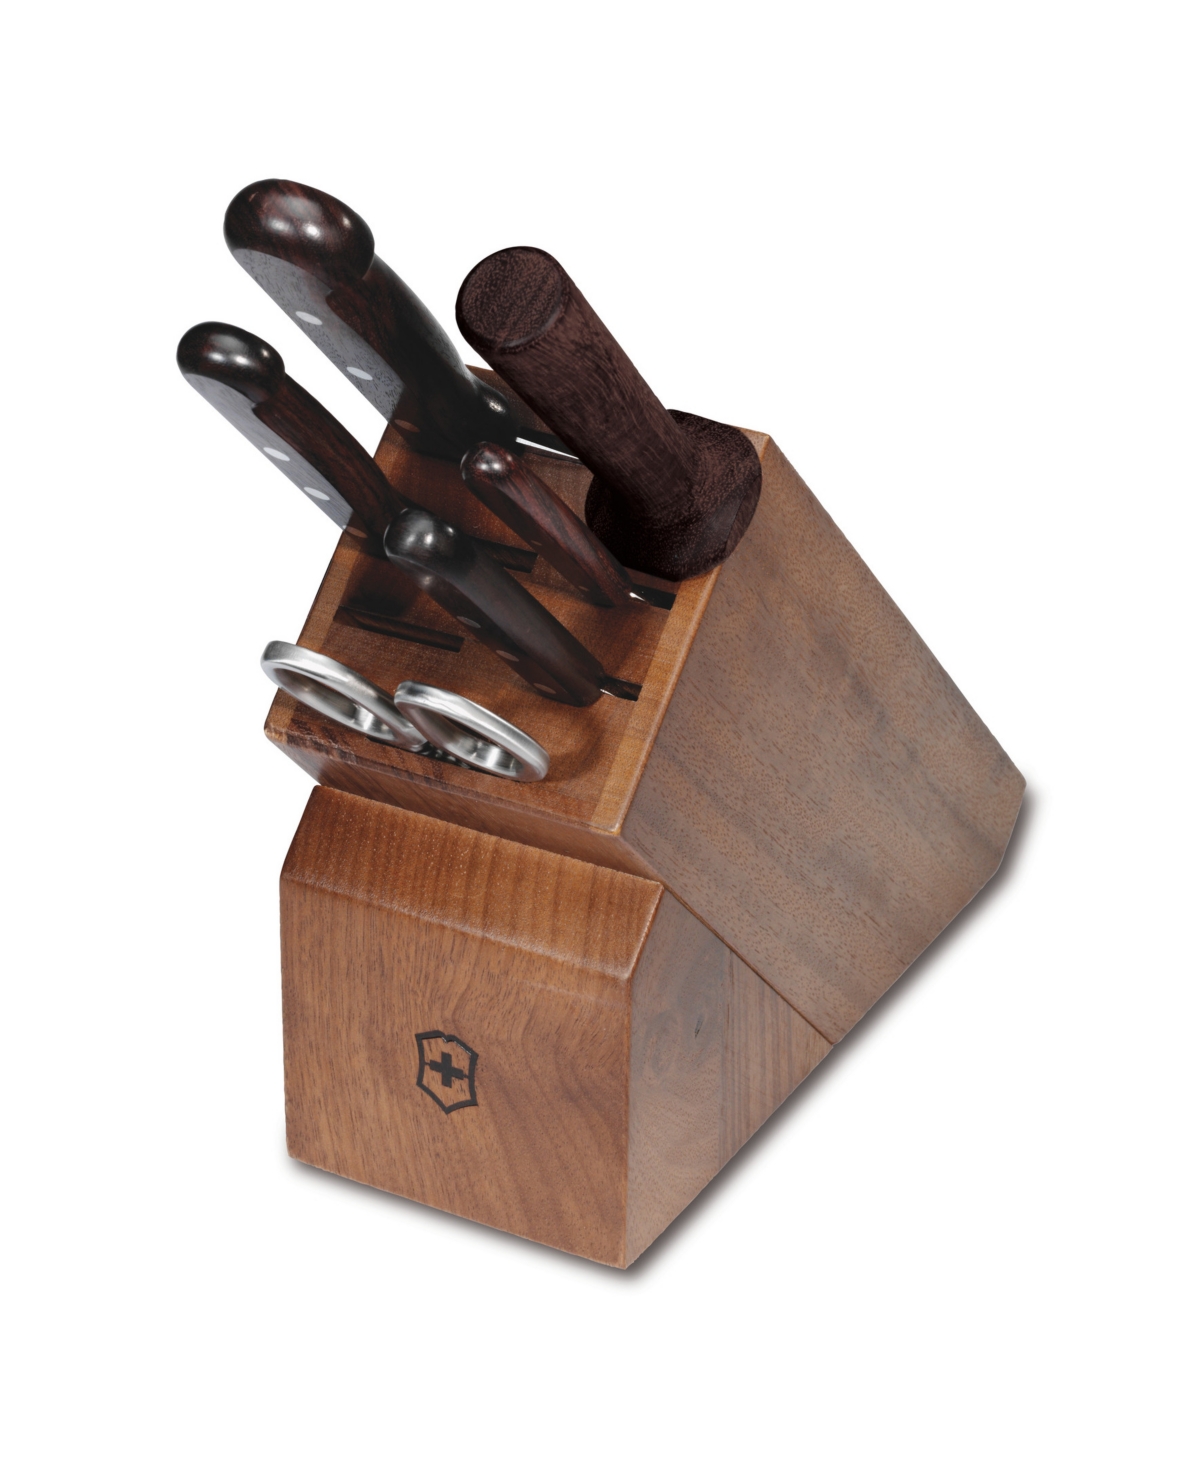 Victorinox Stainless Steel 7 Piece Knife Block Set With Wood Handles